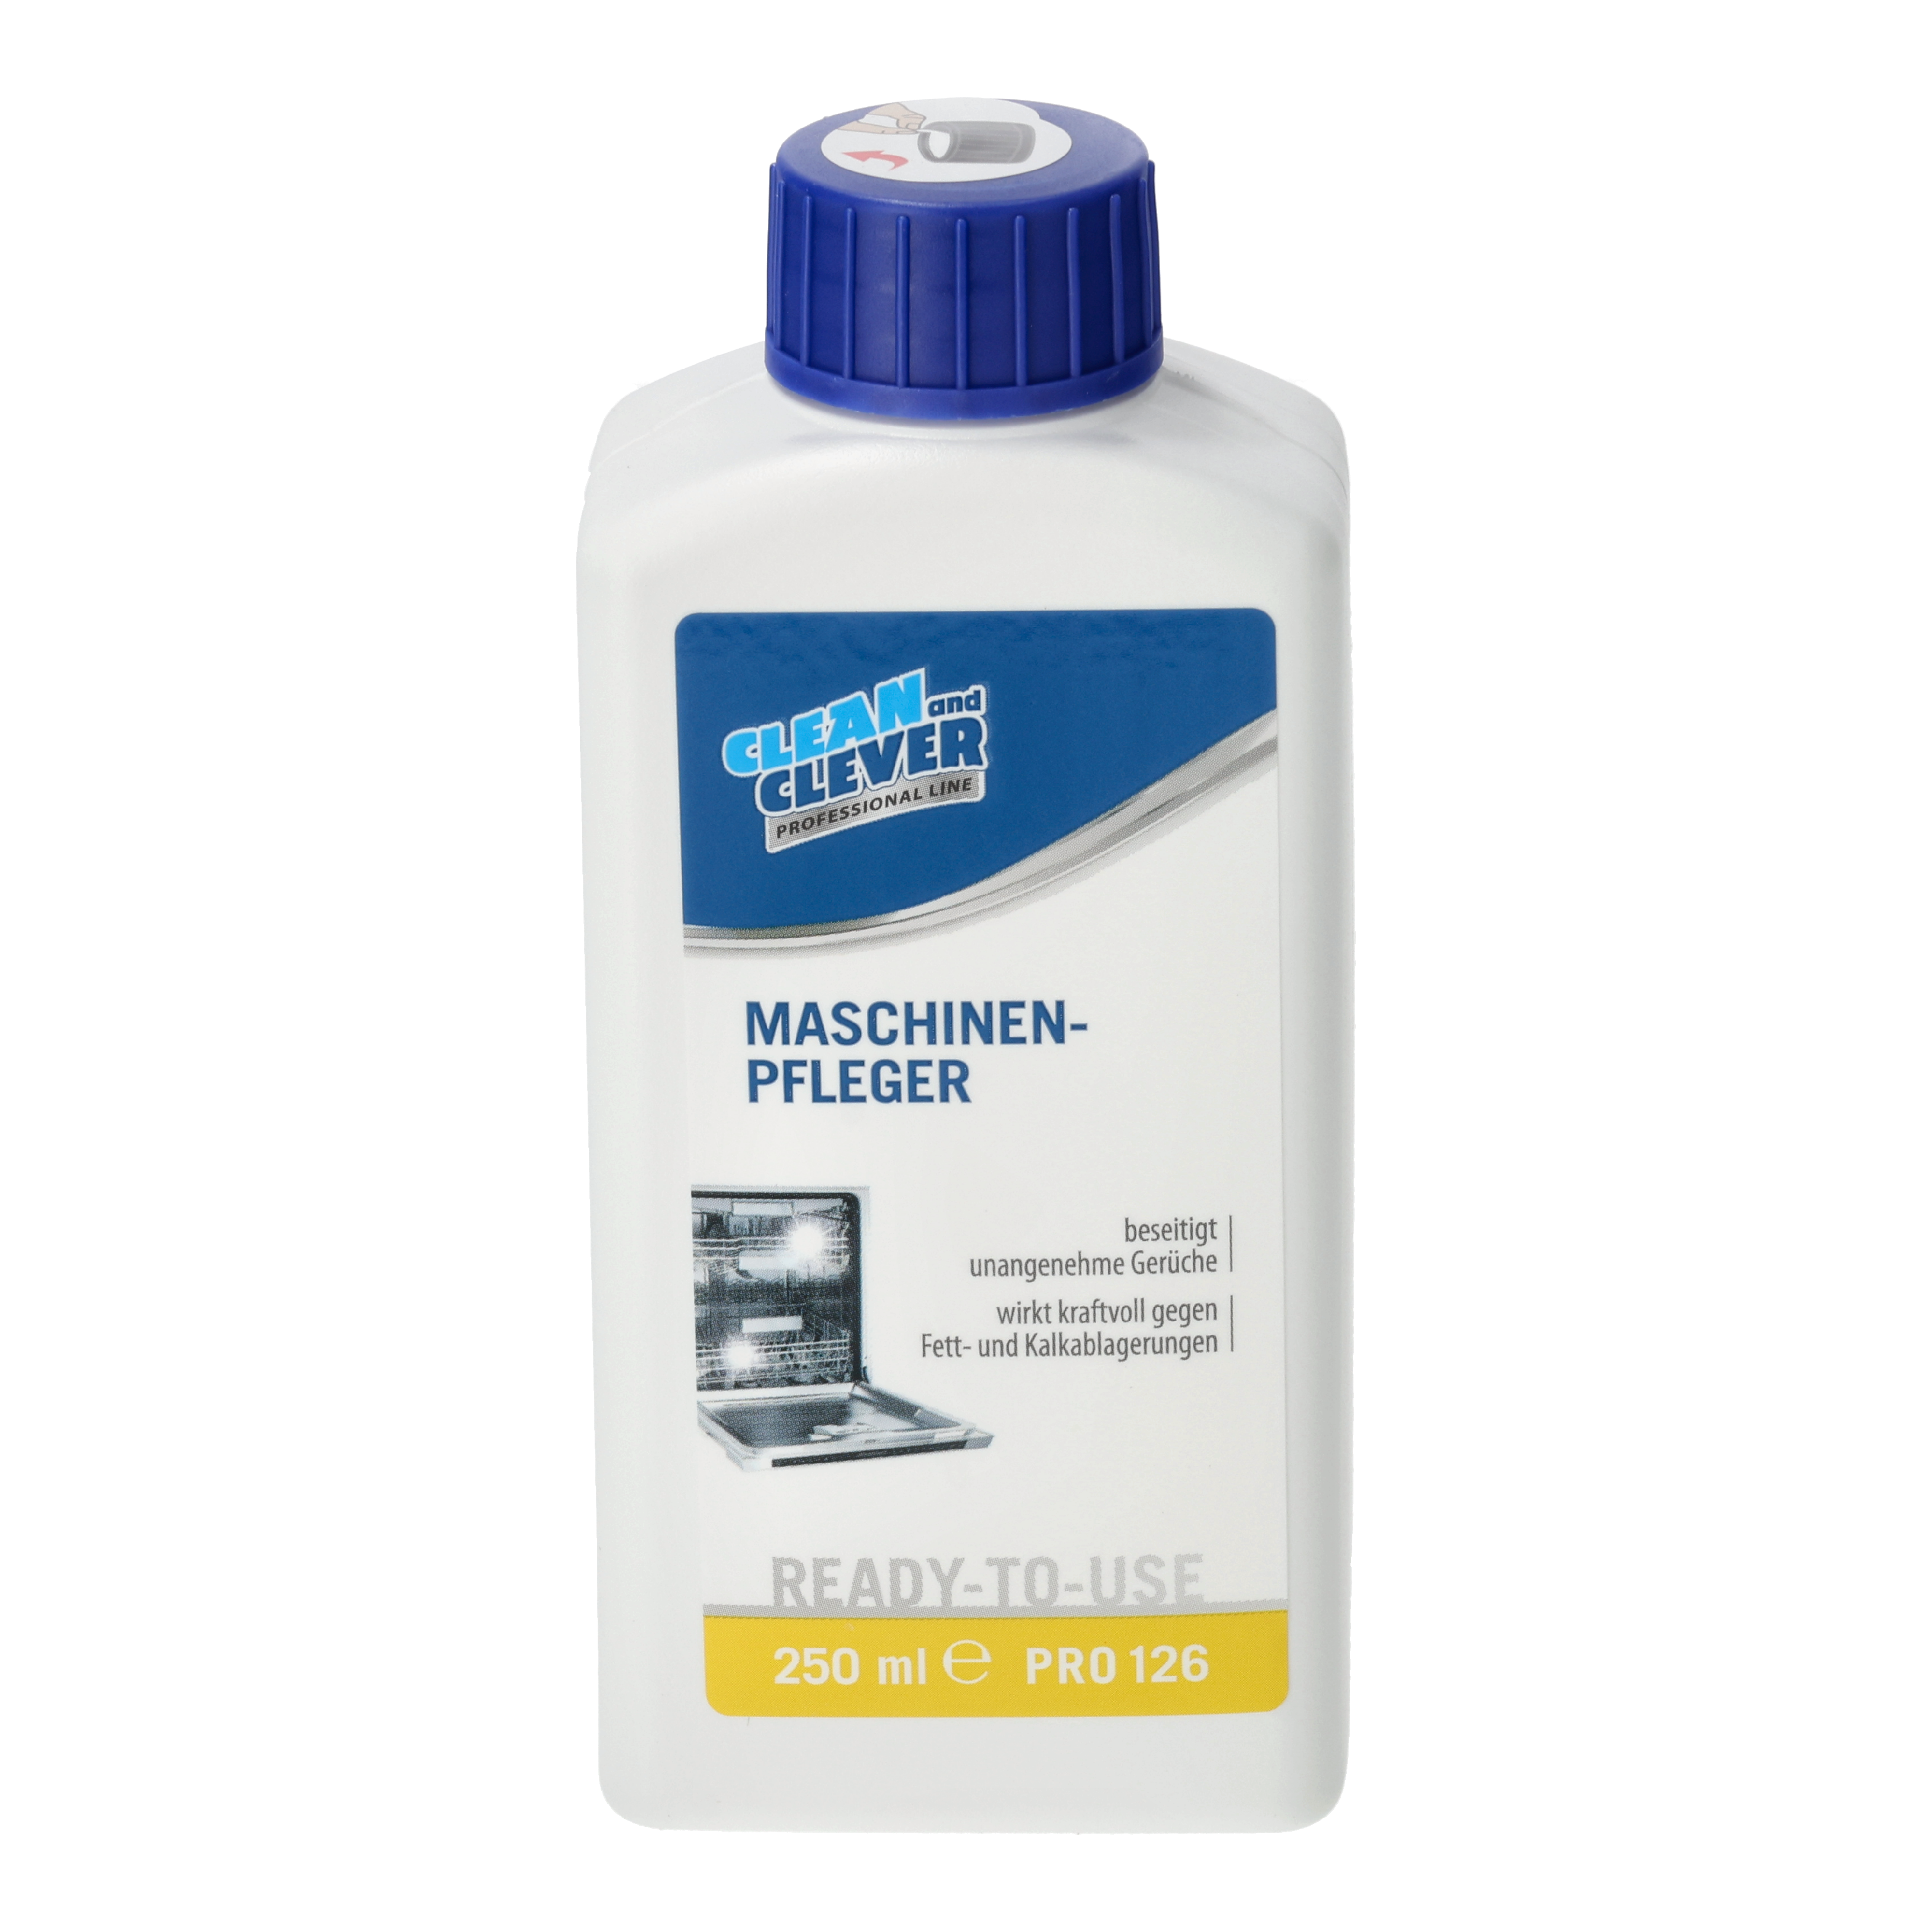 CLEAN and CLEVER PROFESSIONAL Maschinenpfleger PRO126 - 250 ml